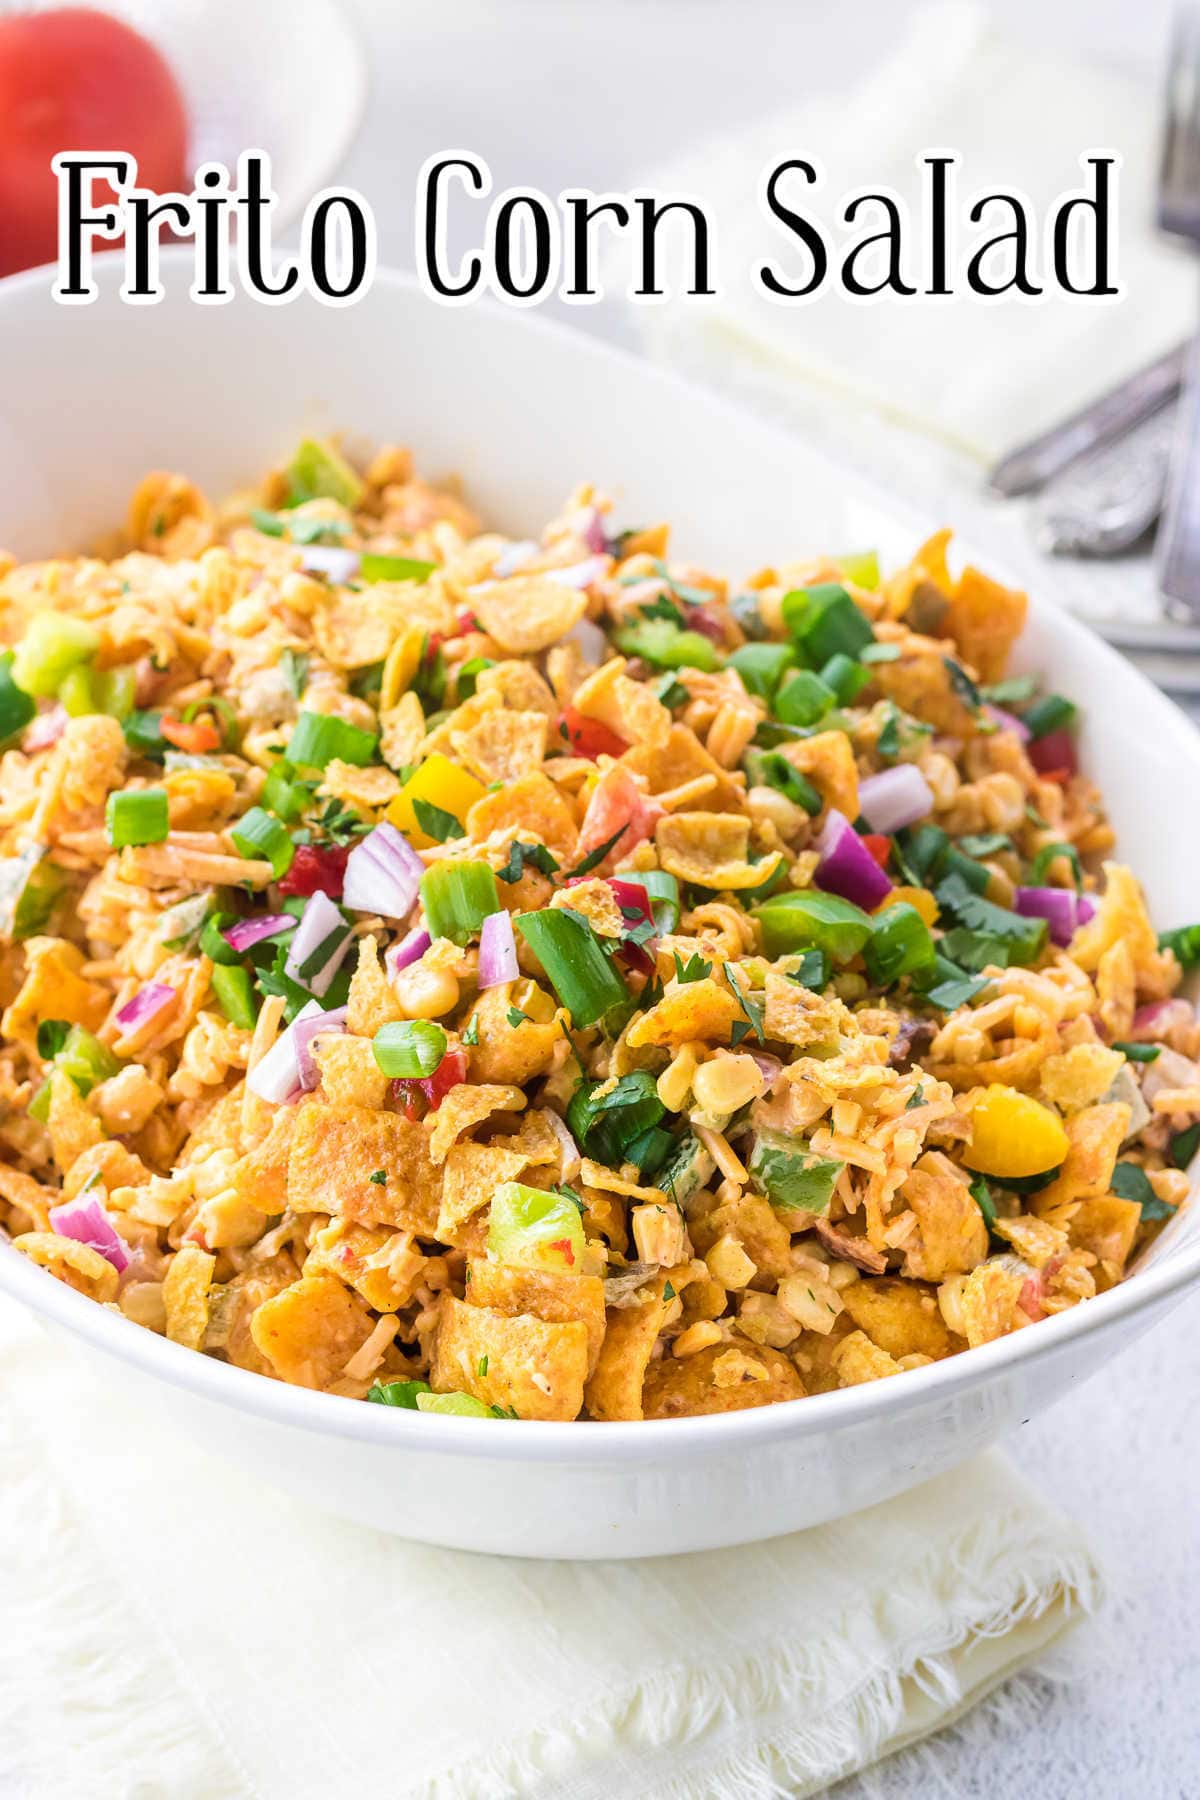 Frito corn salad in a white serving bowl with text overlay.